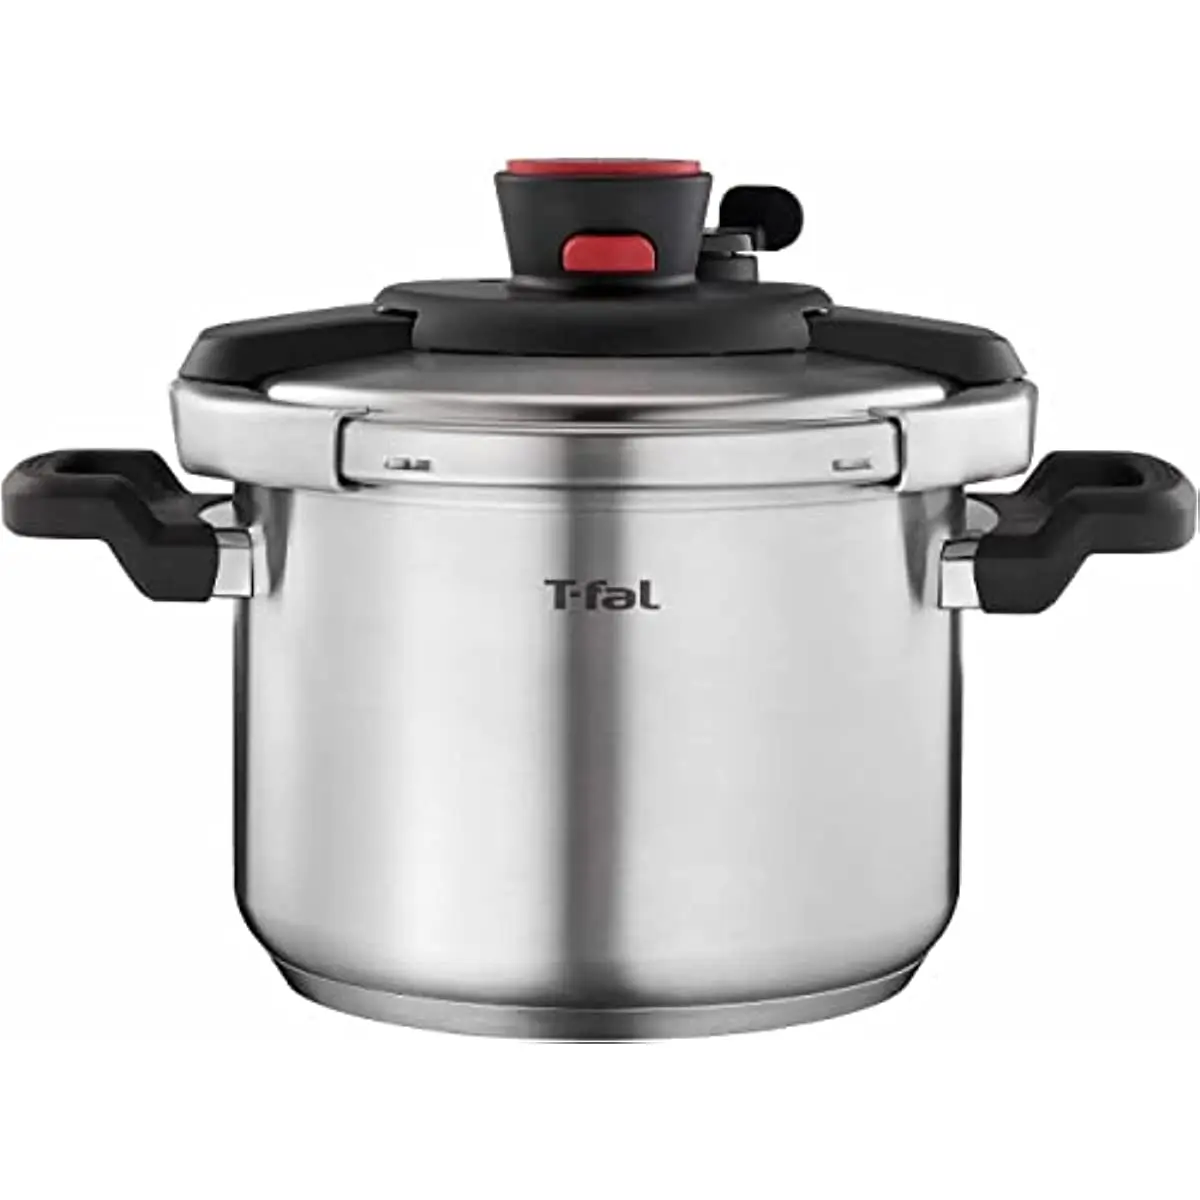 

T-fal Clipso Stainless Steel Pressure Cooker 6.3 Quart Induction Cookware Pots Pans Dishwasher Safe Silver